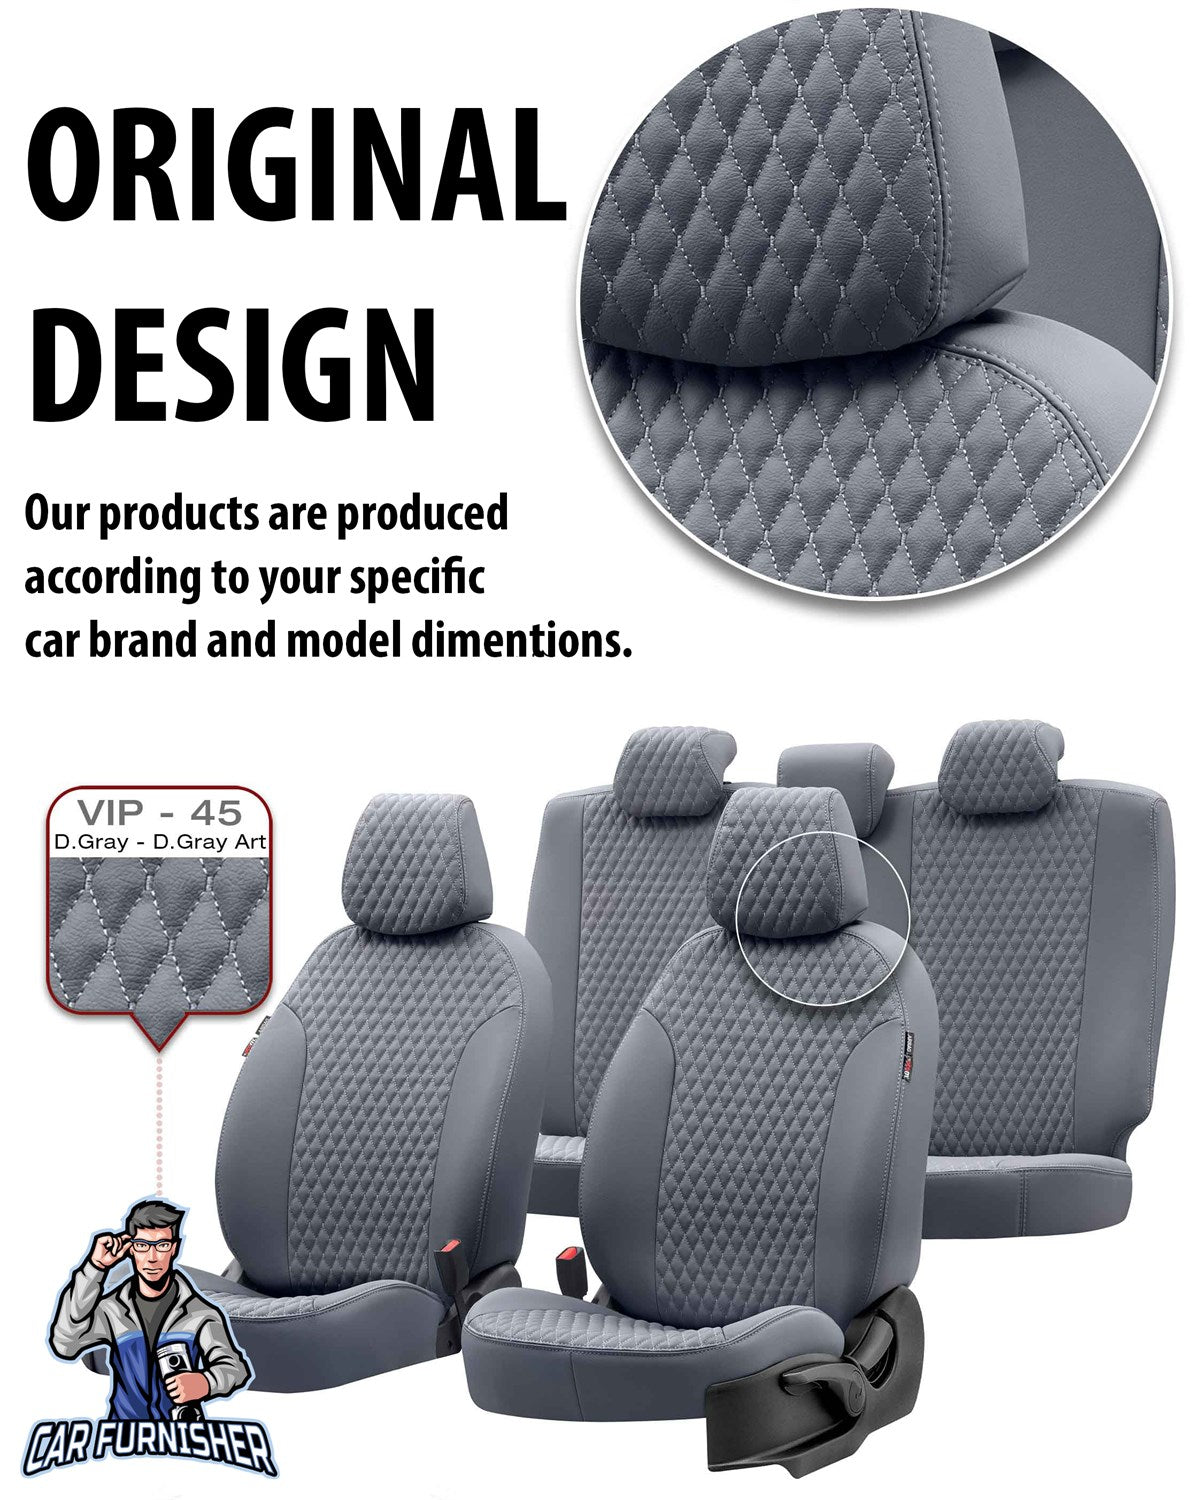 Citroen C2 Seat Covers Amsterdam Leather Design Smoked Black Leather